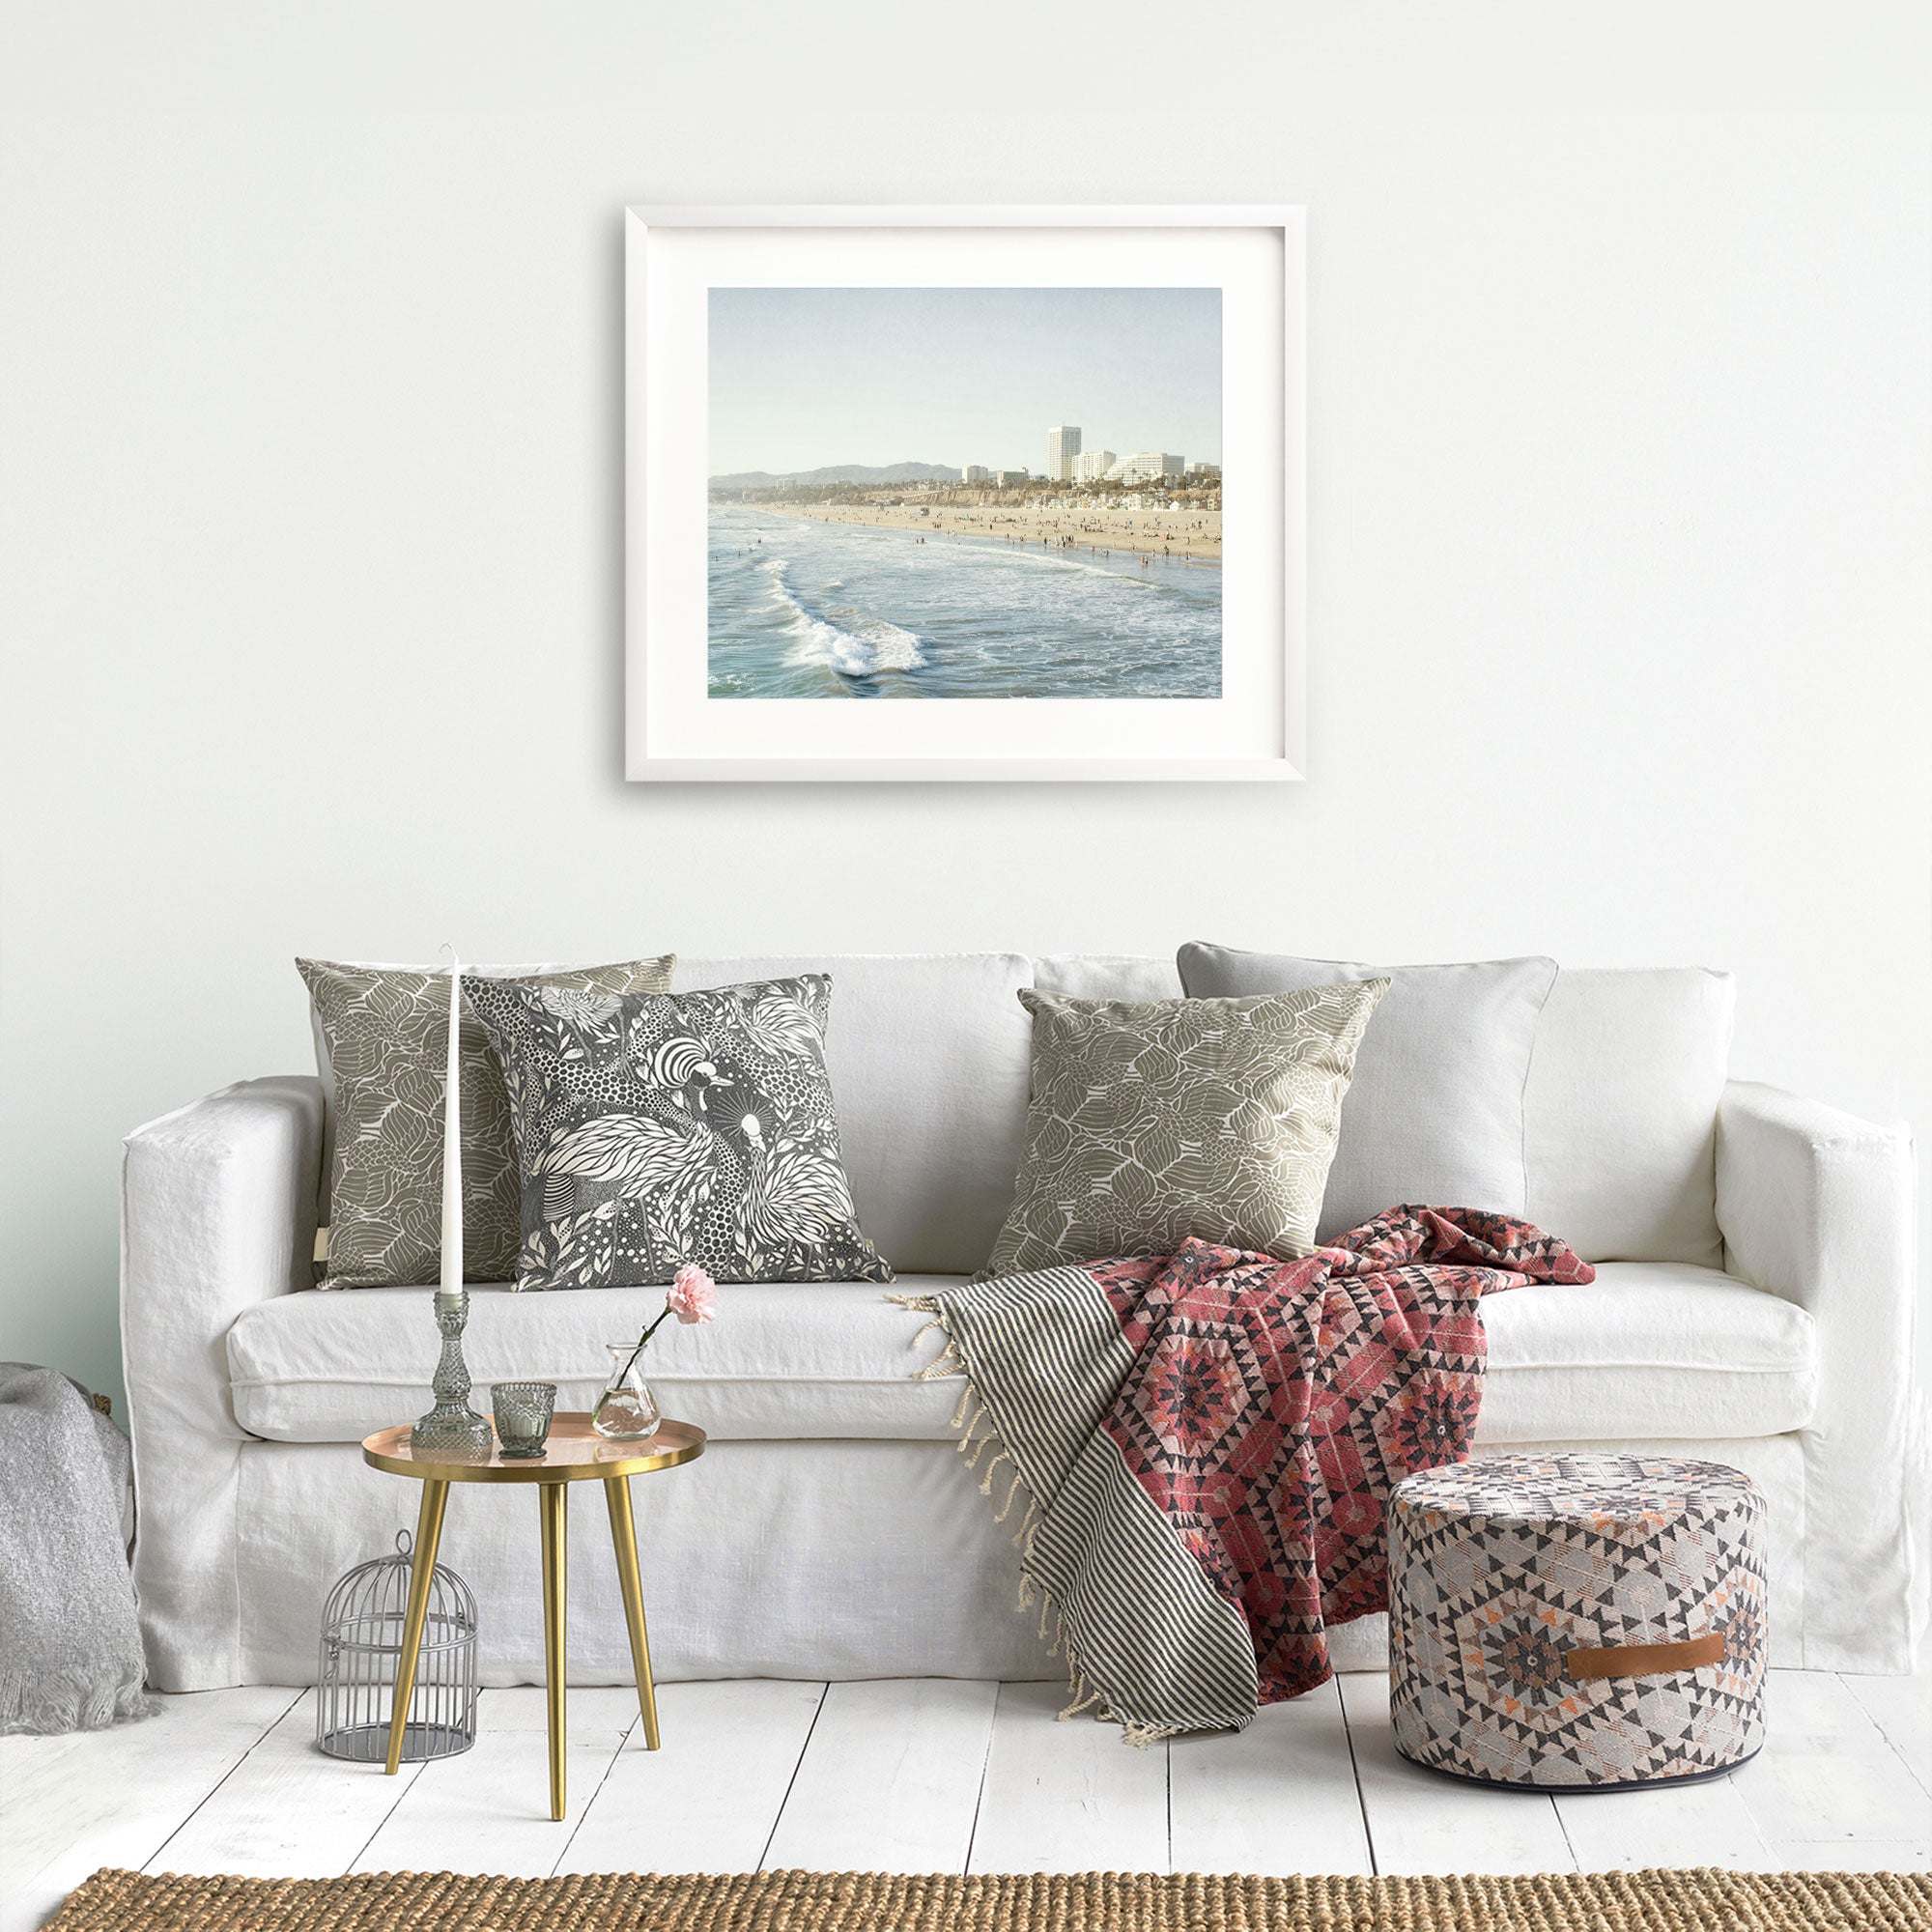 A cozy living room featuring a white sofa with decorative pillows, a throw blanket, and a small side table. Offley Green's 'Santa Monica Seaside' print hangs above the sofa.